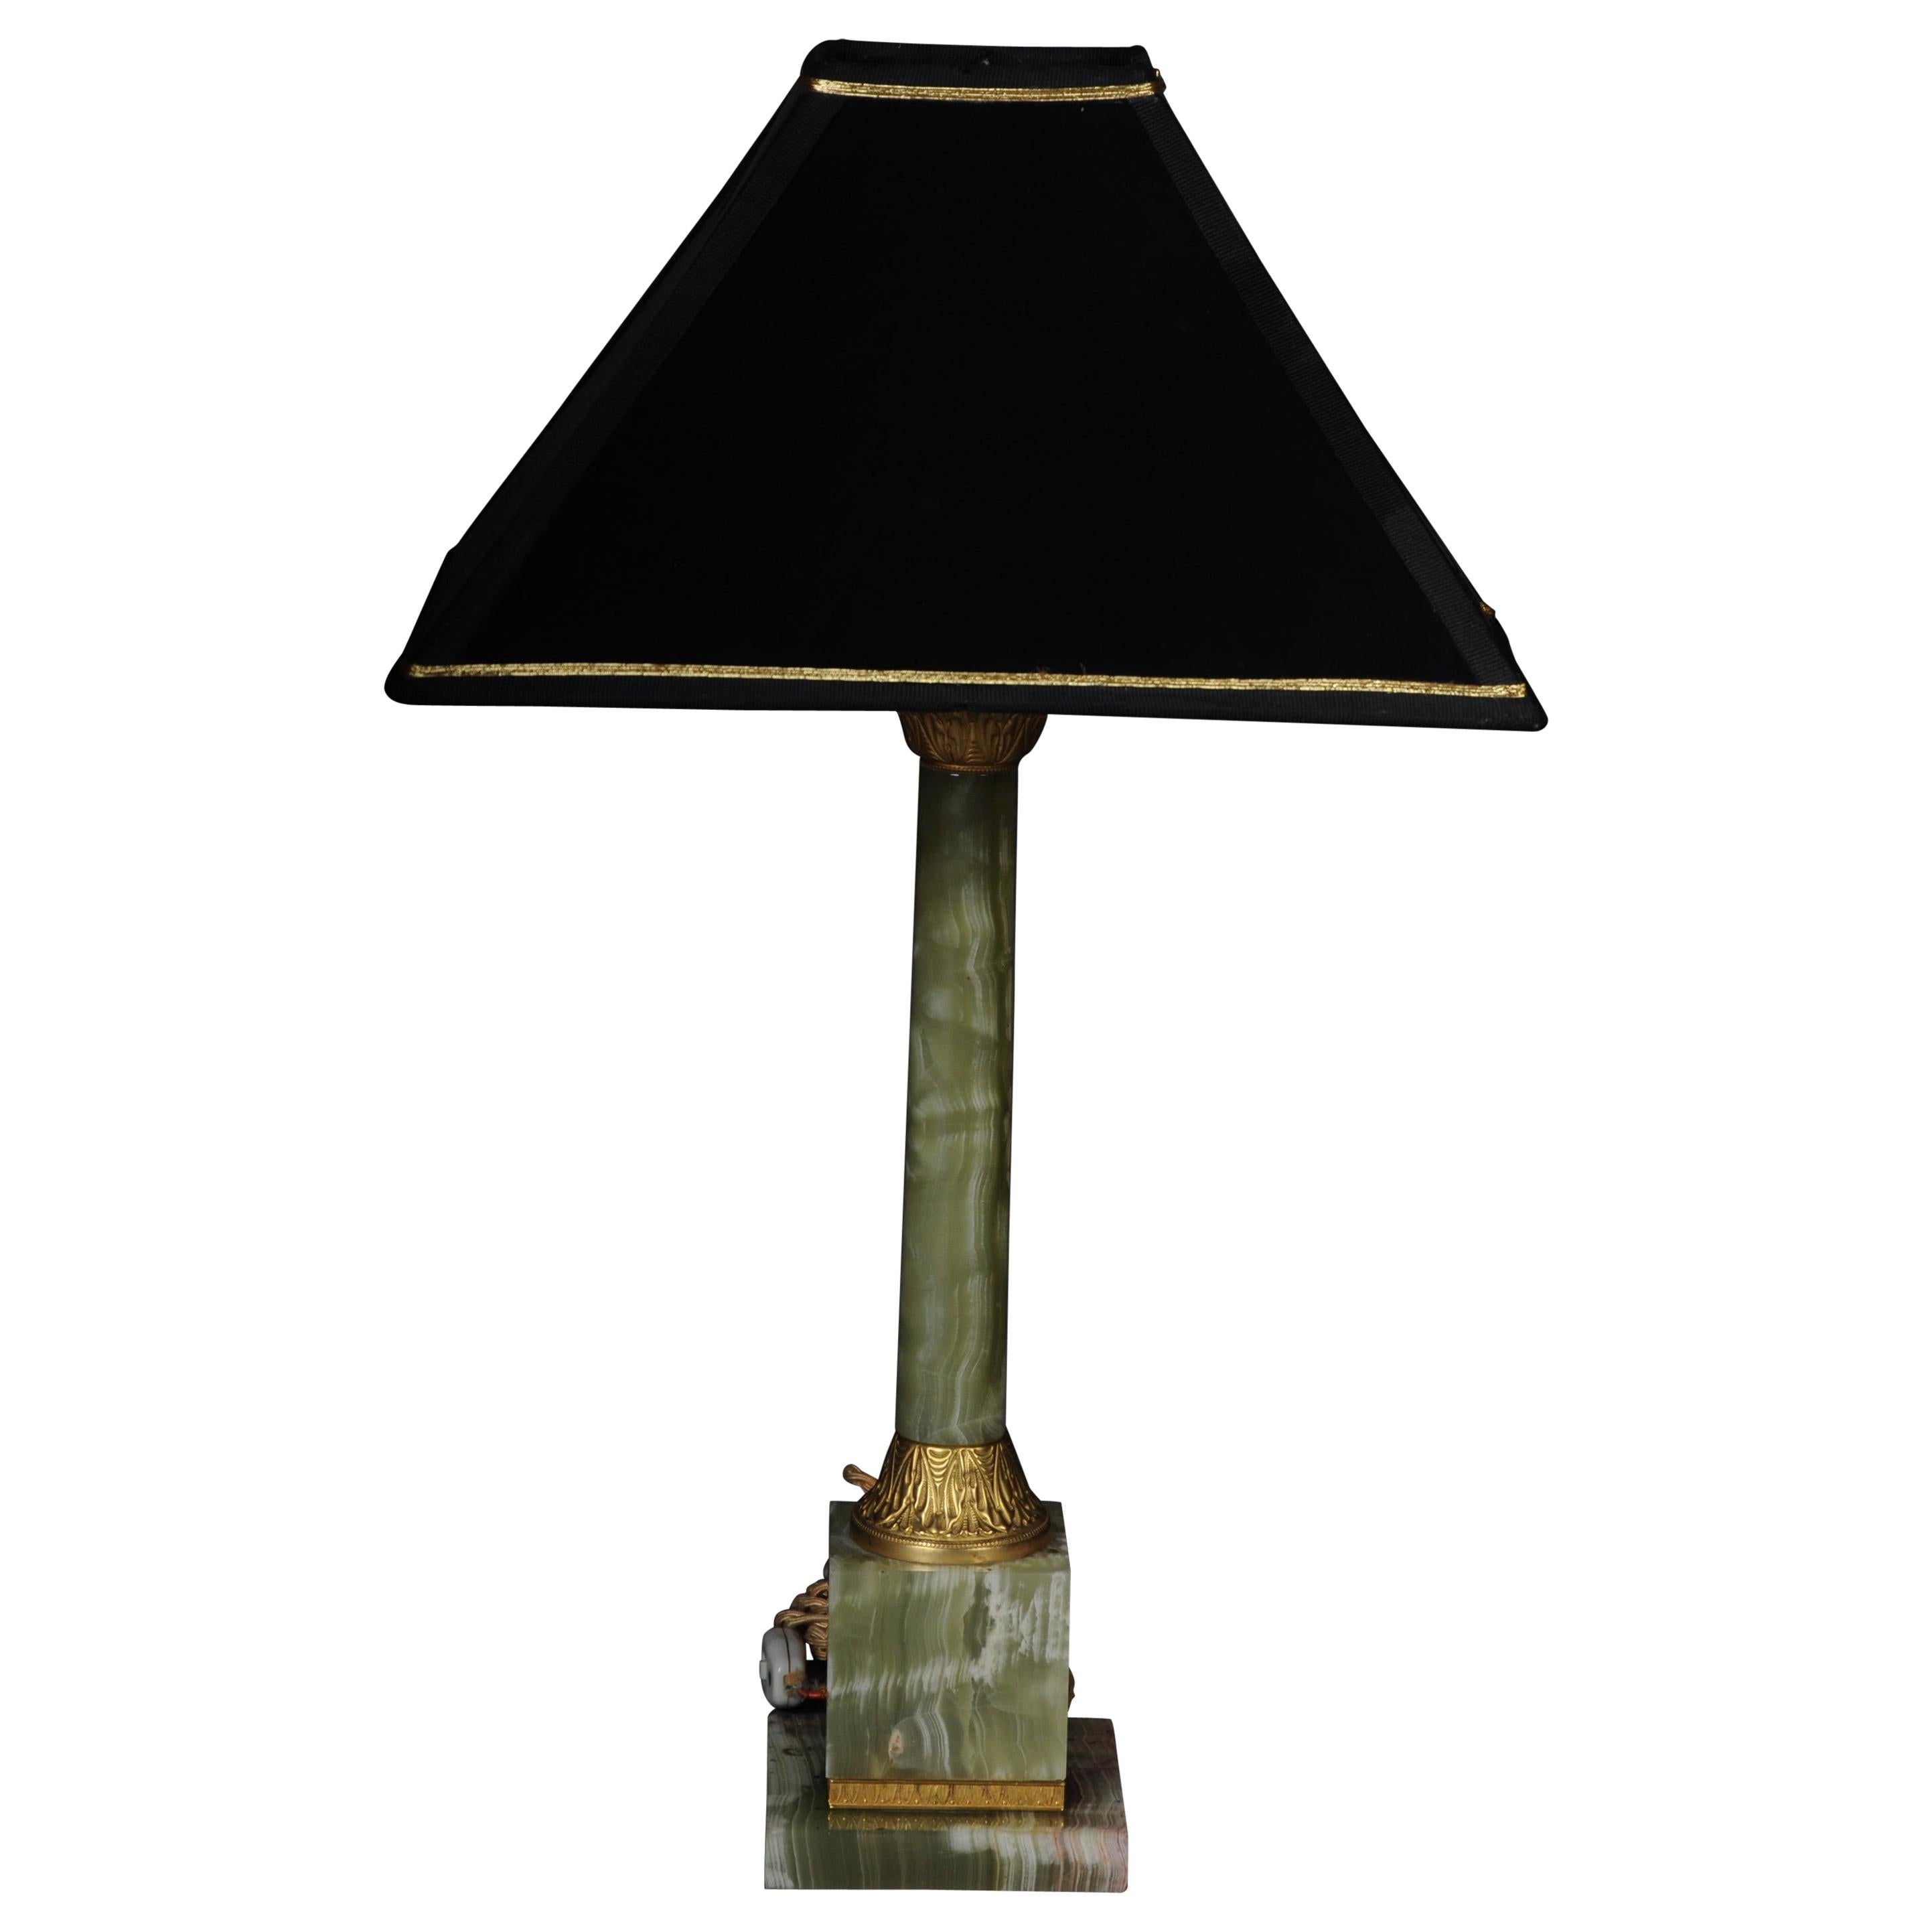 20th Century Classicist Onyx Table Lamp with Brass